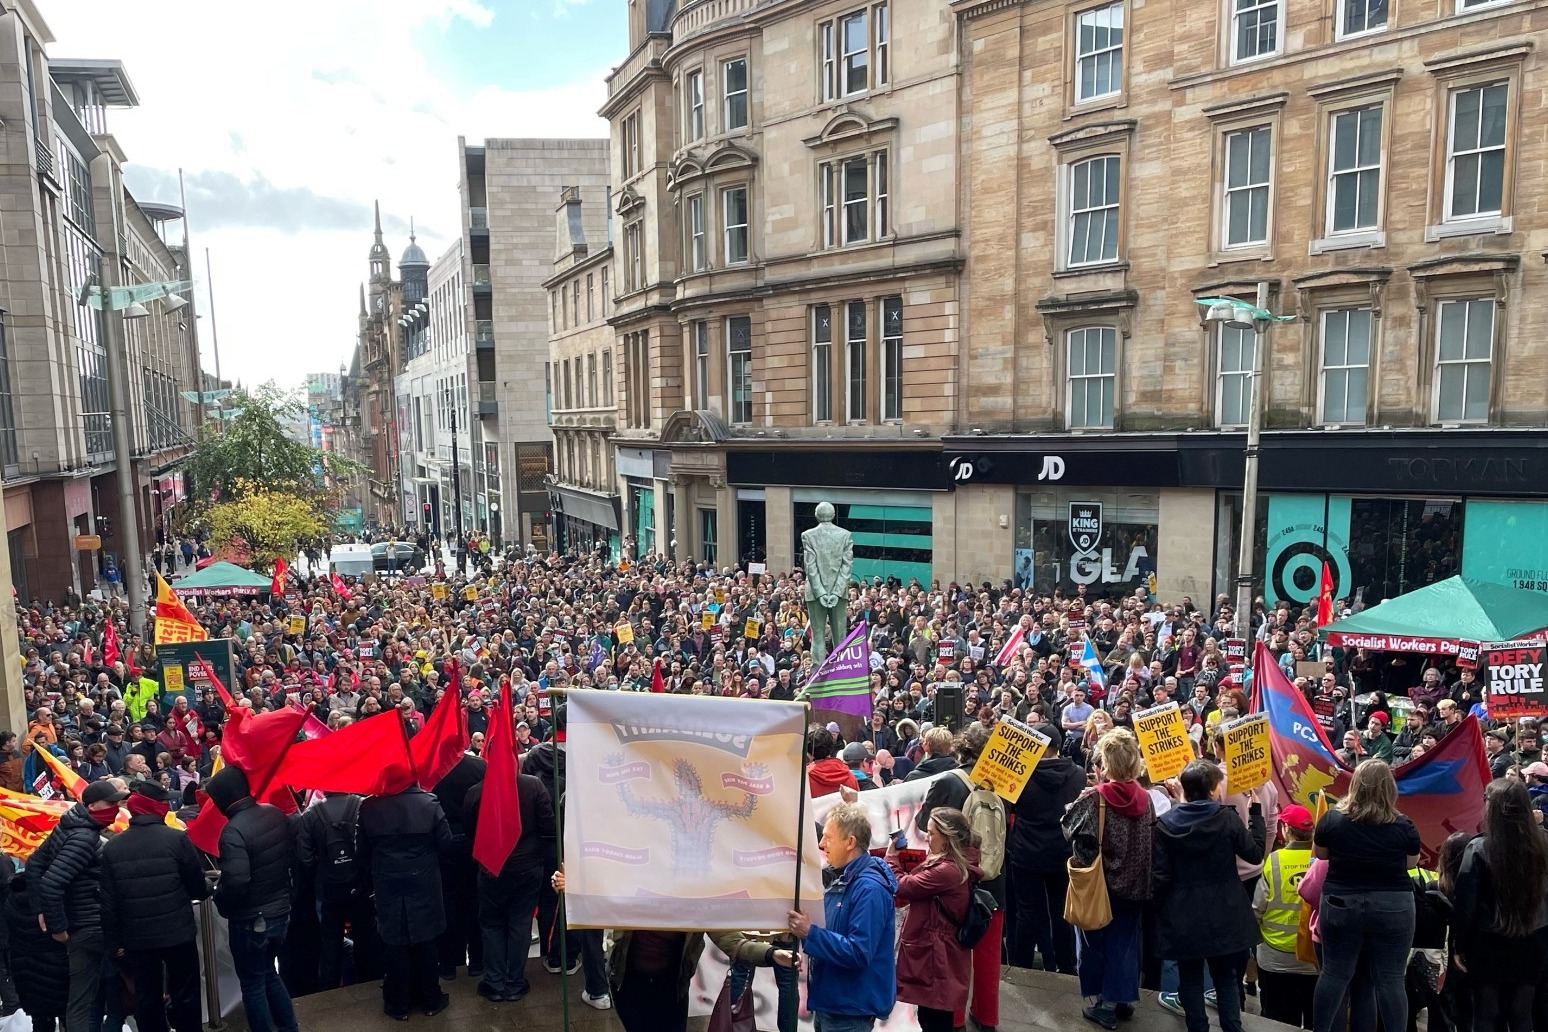 Thousands protest in Glasgow over rising cost of living 